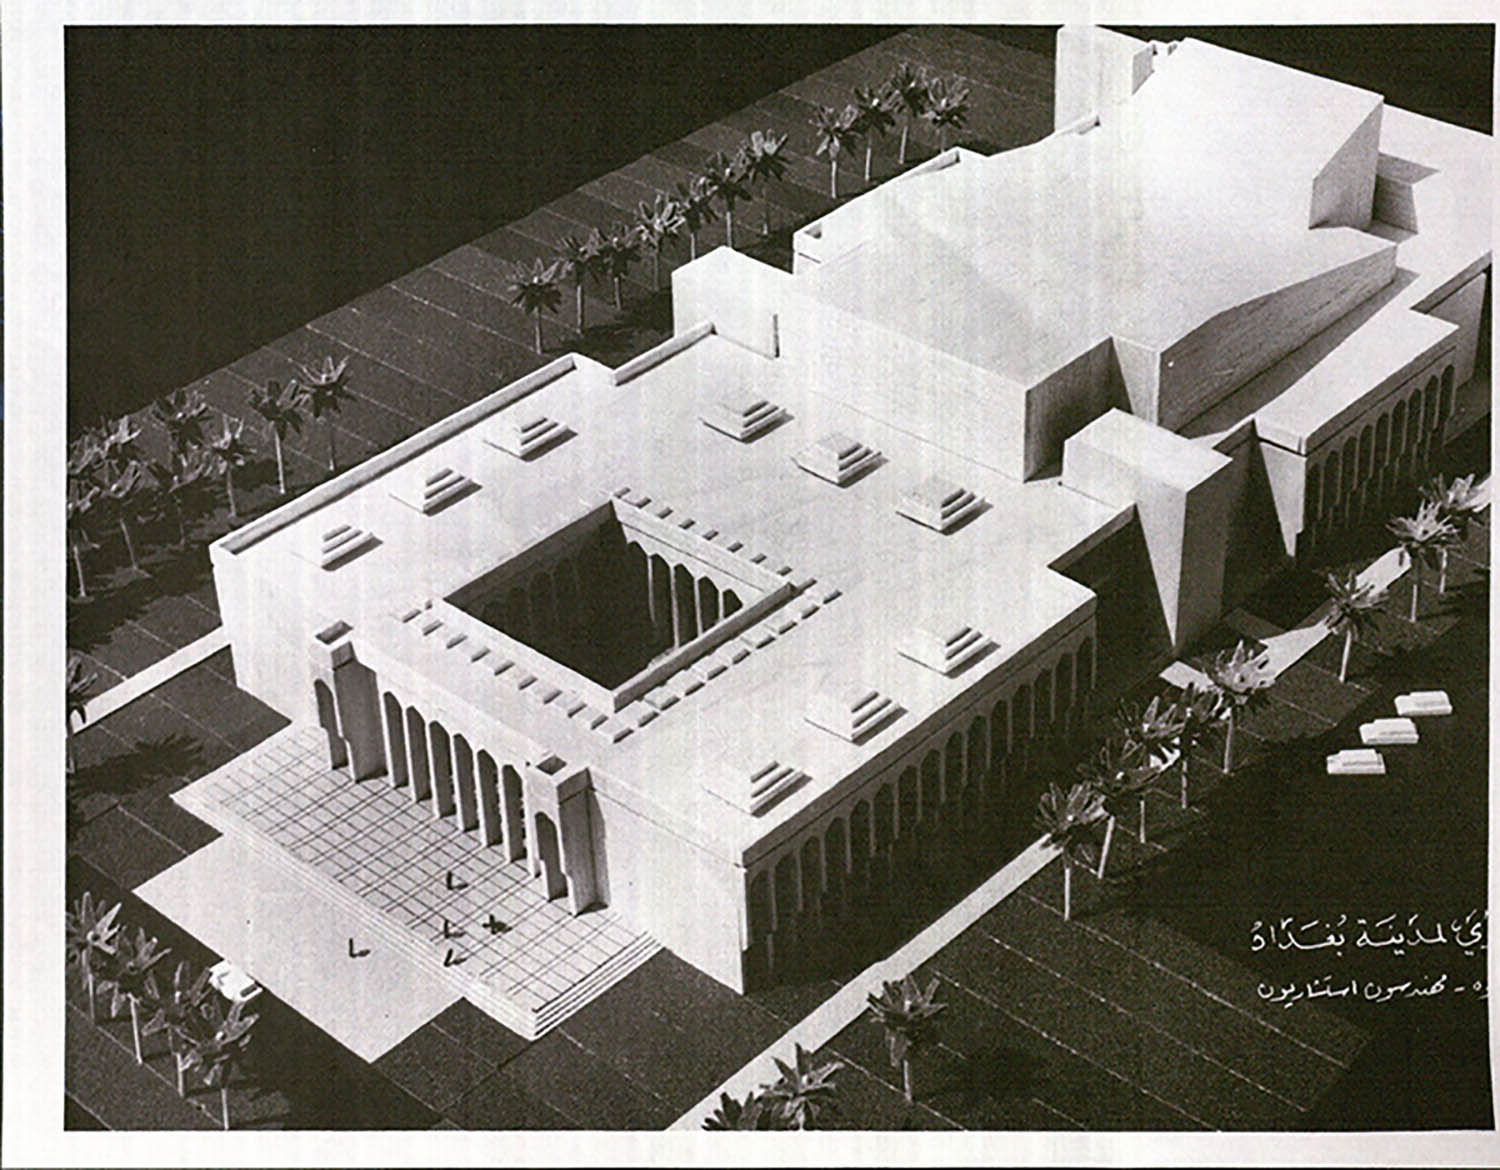 Gulbenkian Foundation - Aerial view of a model constructed for the planning of the Gulbenkian Foundation.